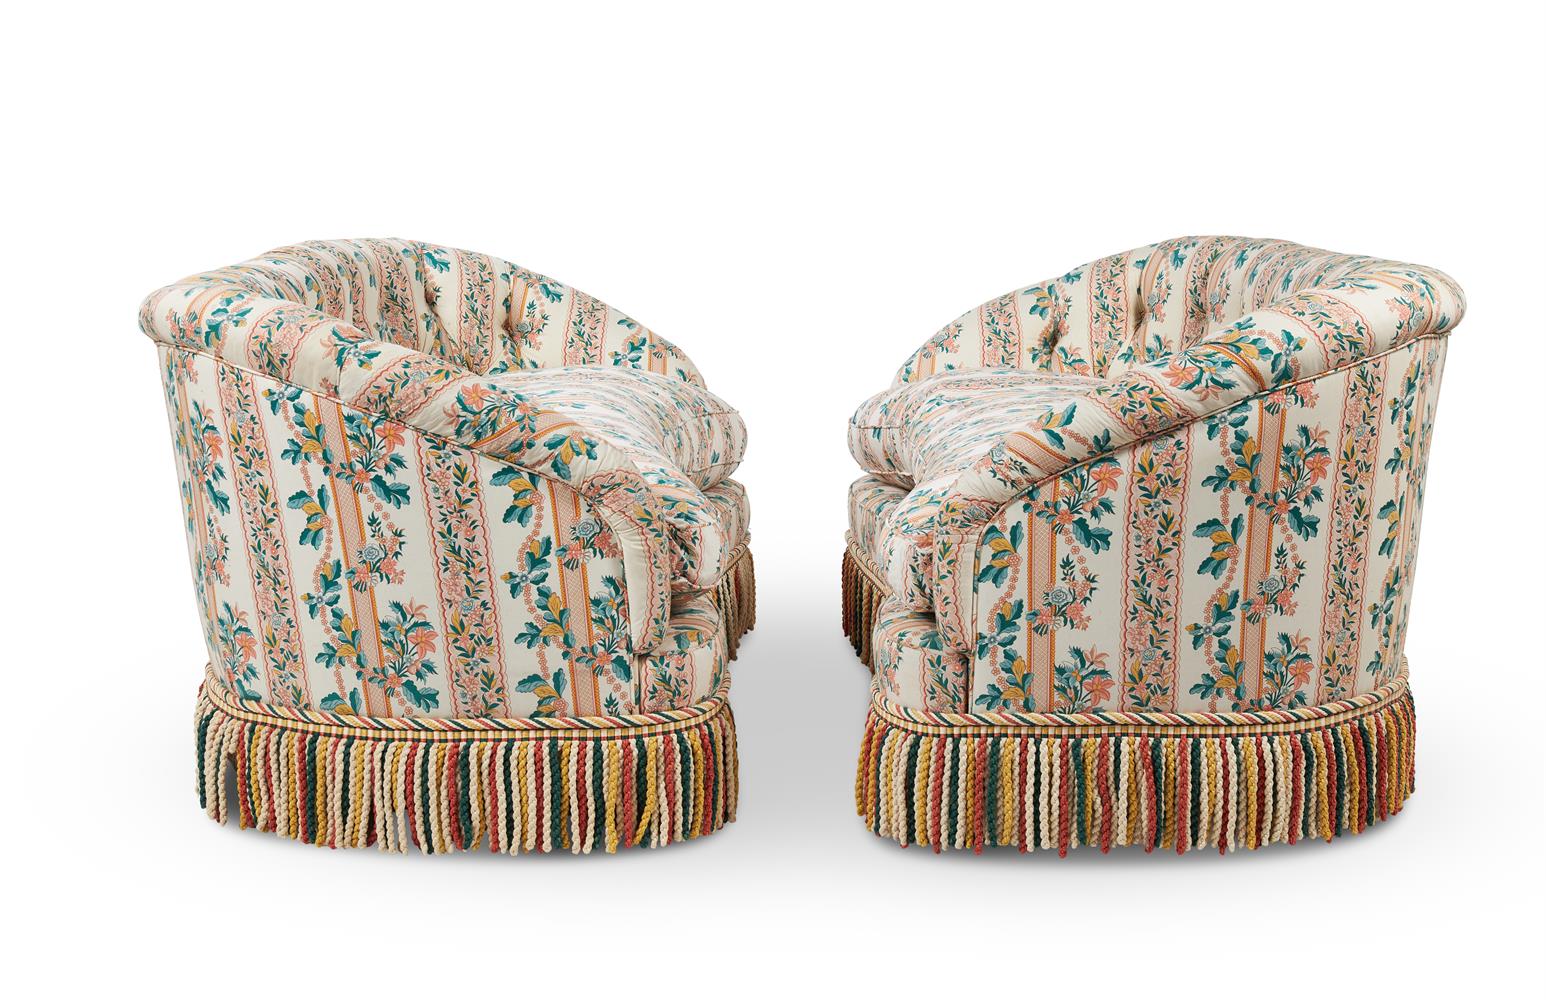 A PAIR OF KIDNEY SHAPED SOFAS IN VICTORIAN STYLE - Image 2 of 4